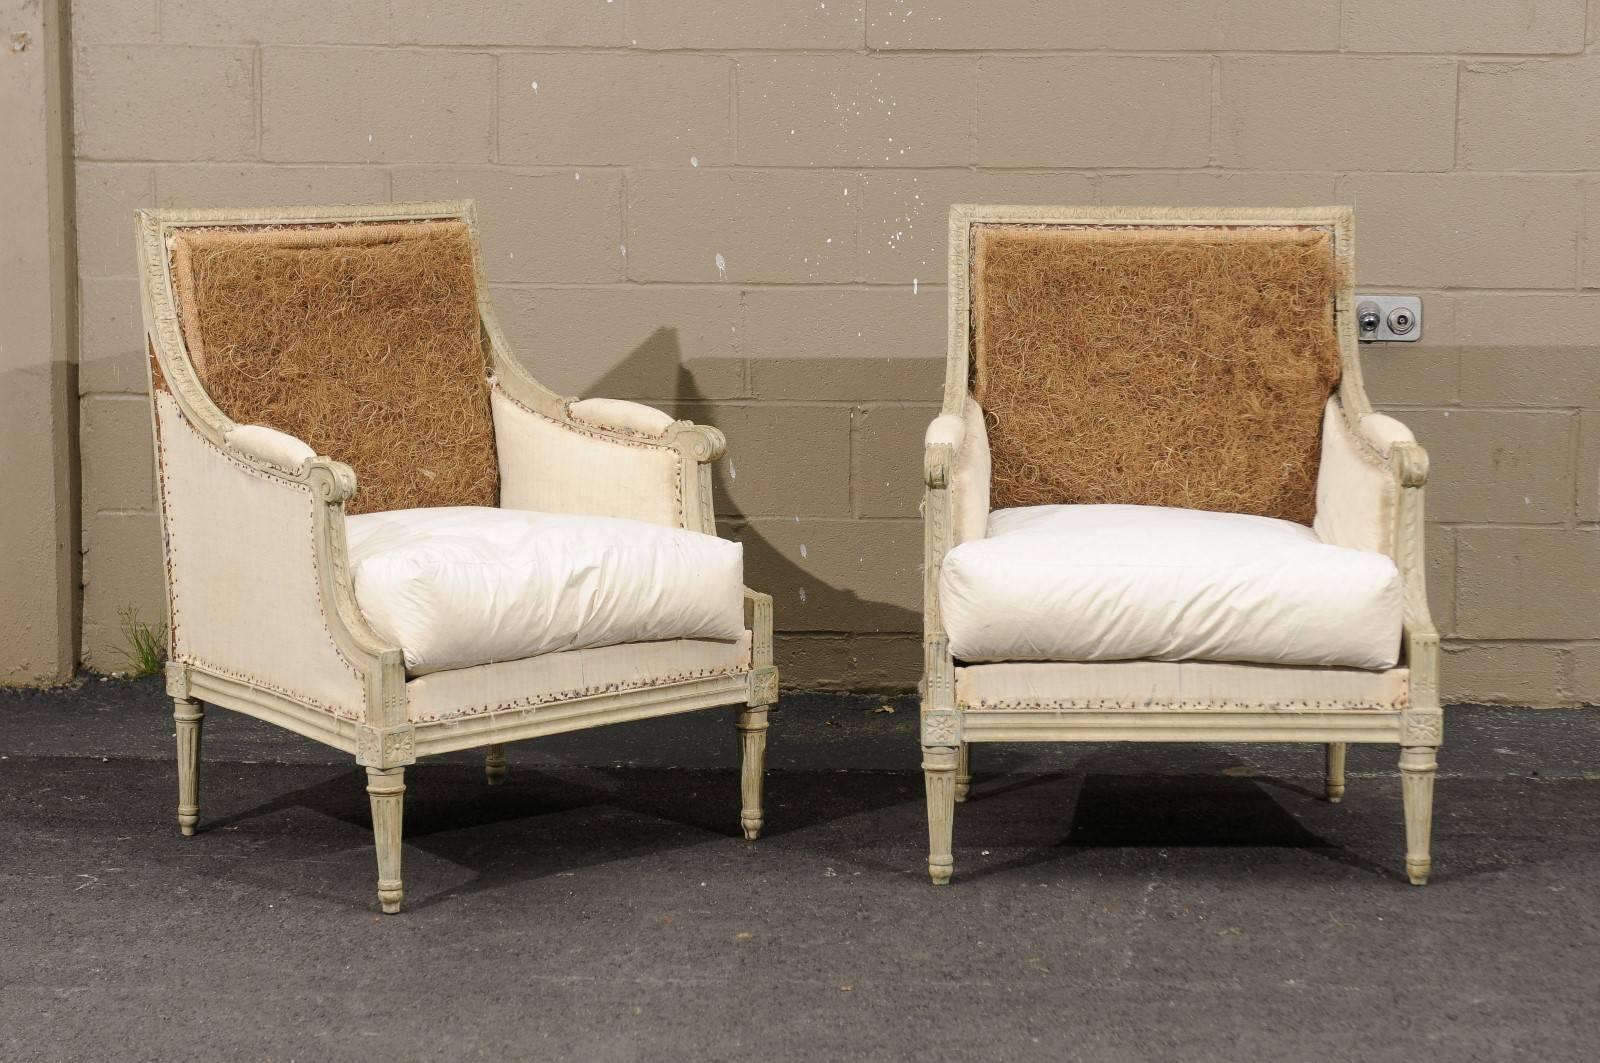 A pair of French early 20th century Louis XVI style painted bergère chairs from Southern France. These French chairs feature a linear back over partially upholstered and scrolled arms. Four carved rosettes adorn the knees of these French chairs,